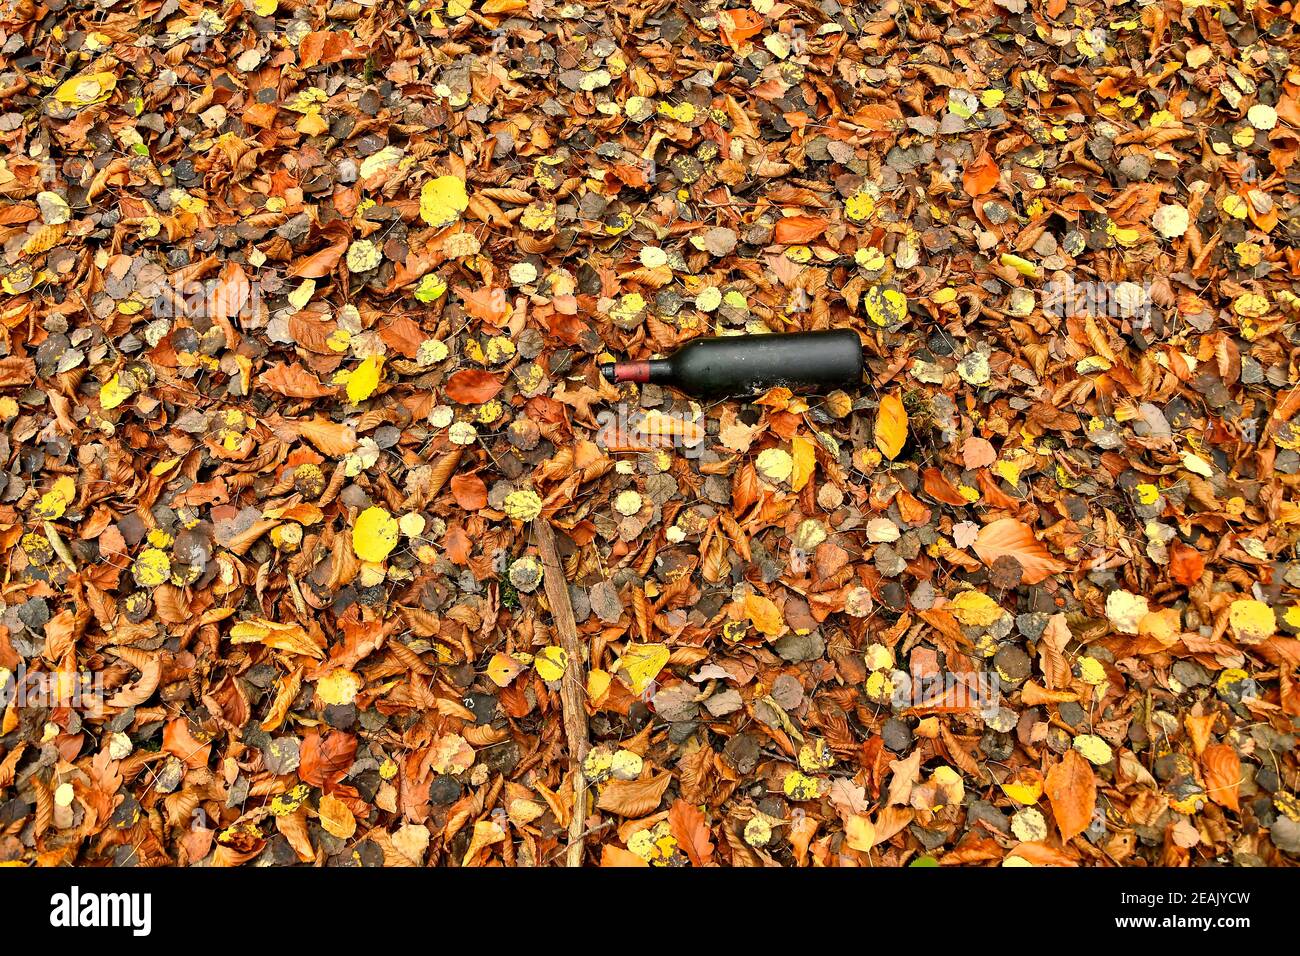 old liquor bottle in autumnal painted leaves Stock Photo